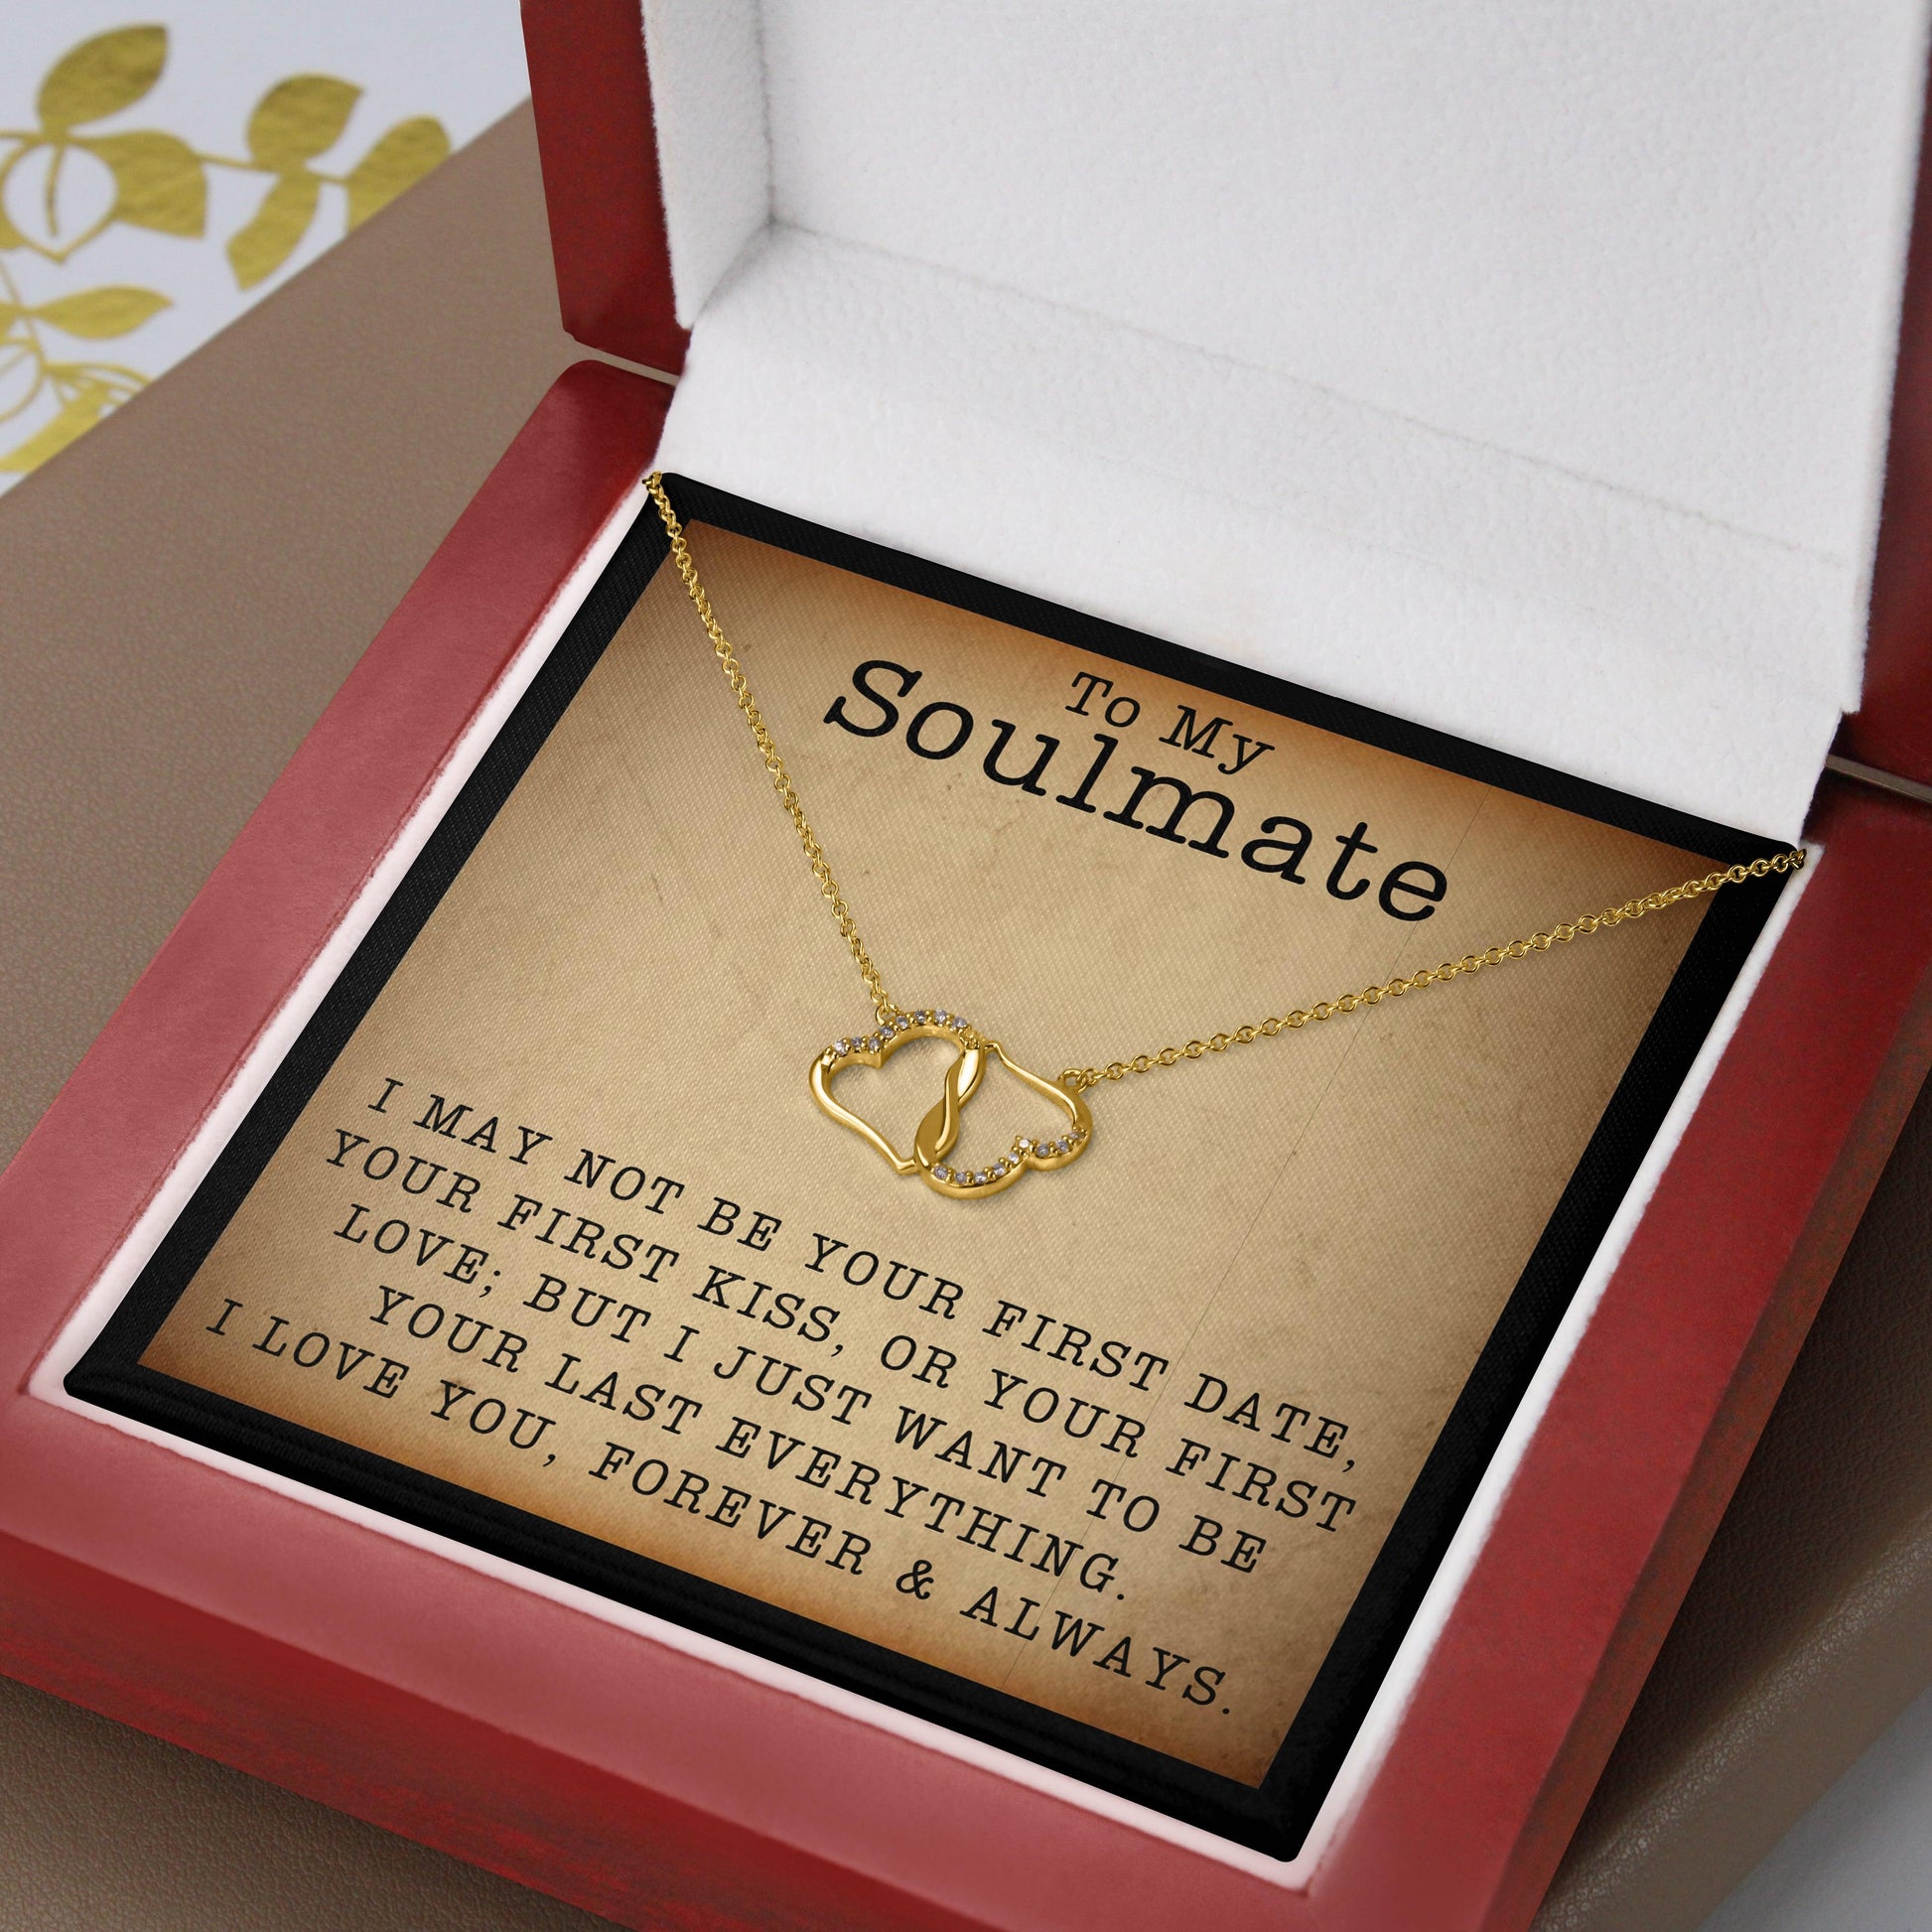 Jewelry gifts (Soulmate) Last Everything - Solid Gold with Diamonds Necklace - Belesmé - Memorable Jewelry Gifts 